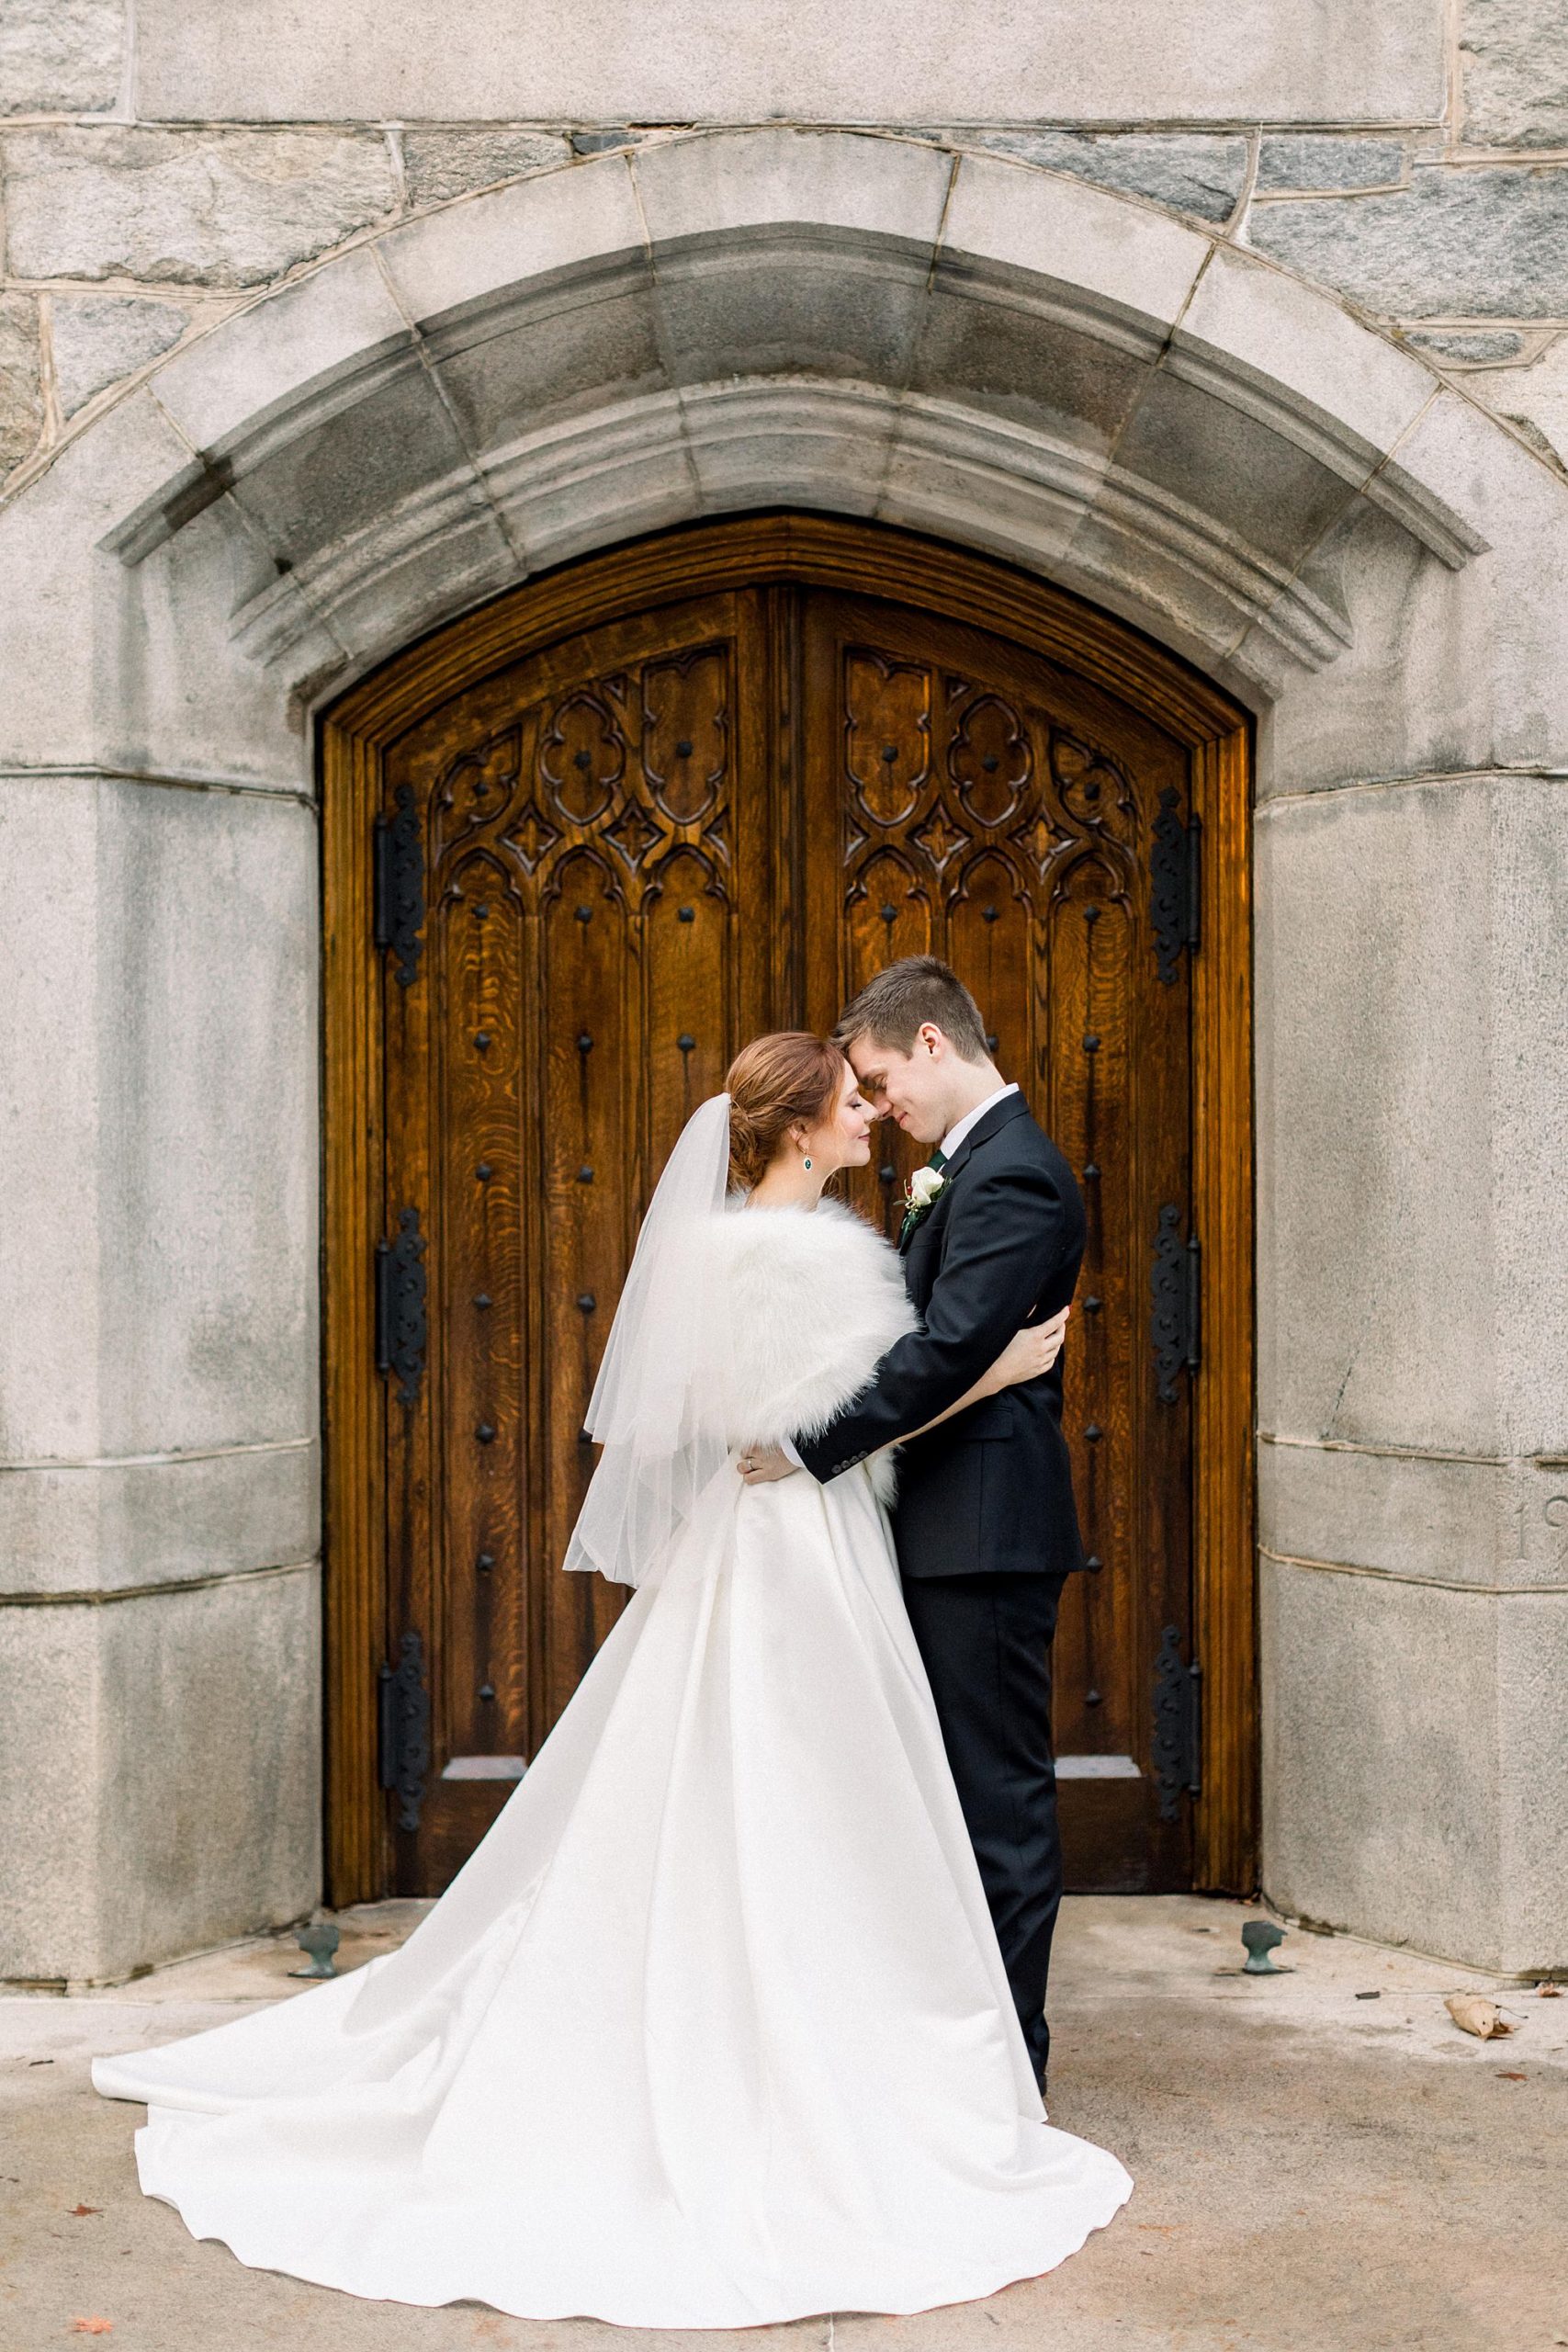 8 Advantages of a Winter Wedding in Boston and New England